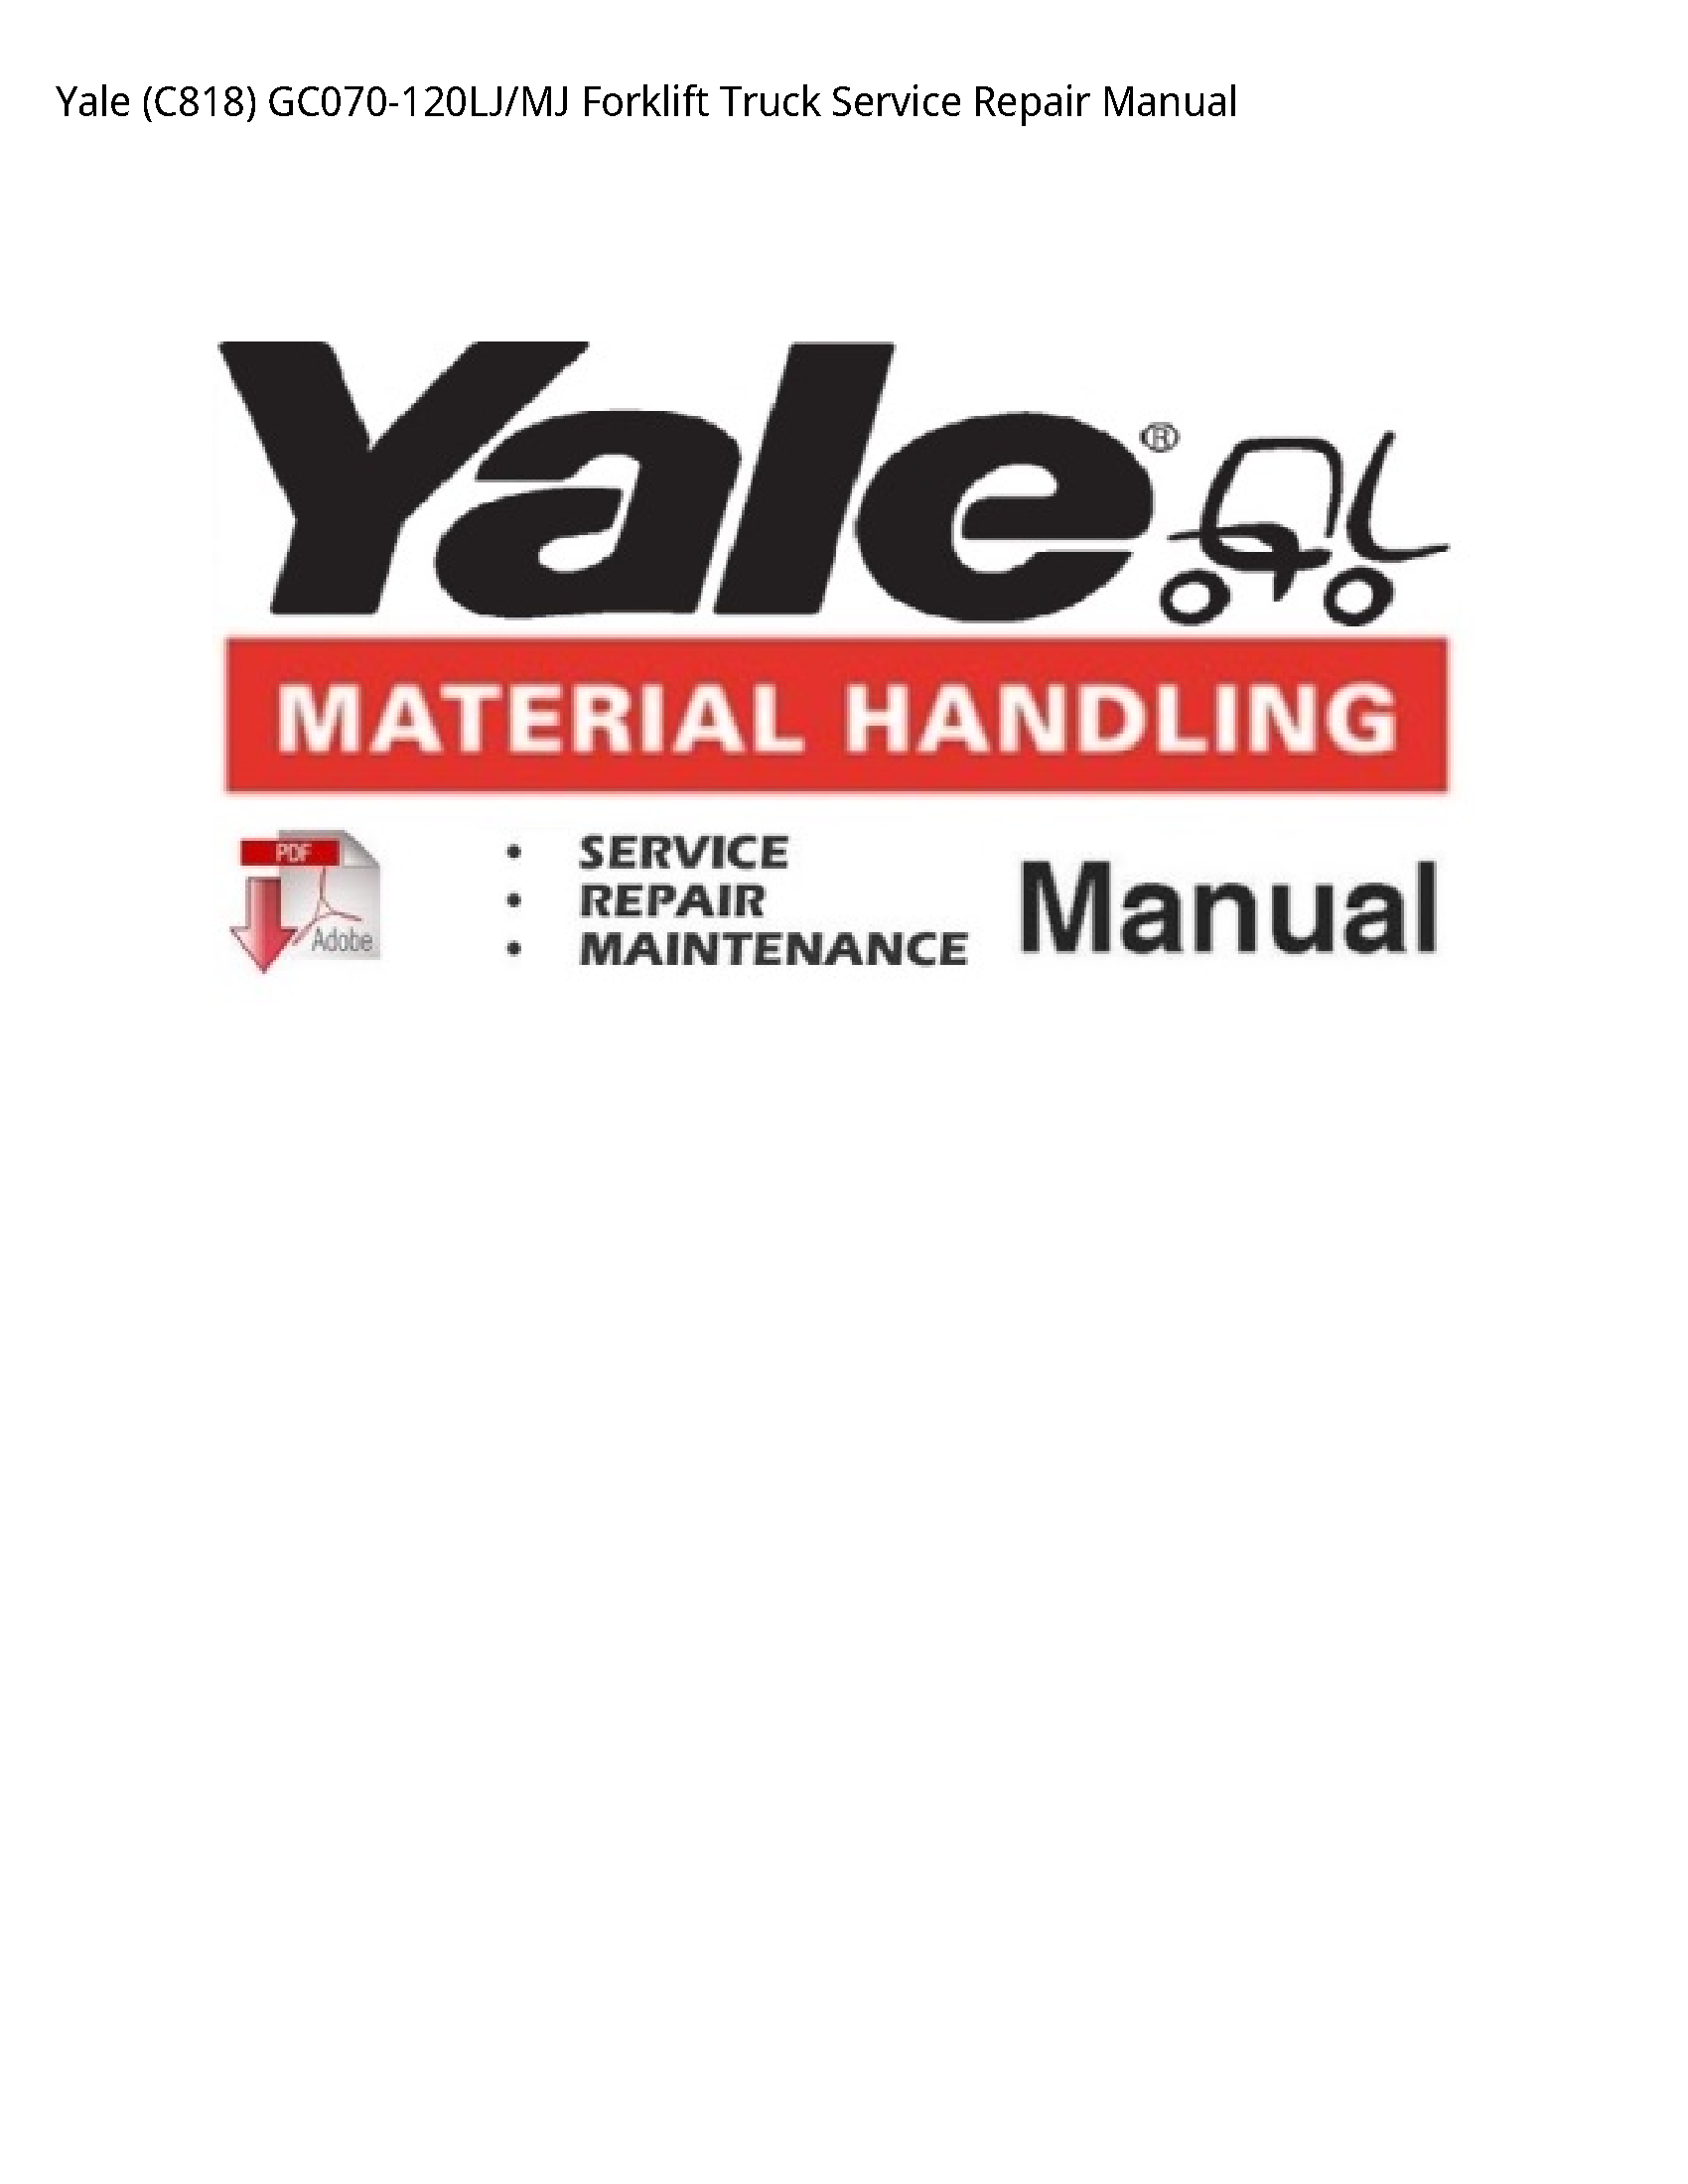 Yale (C818) Forklift Truck manual